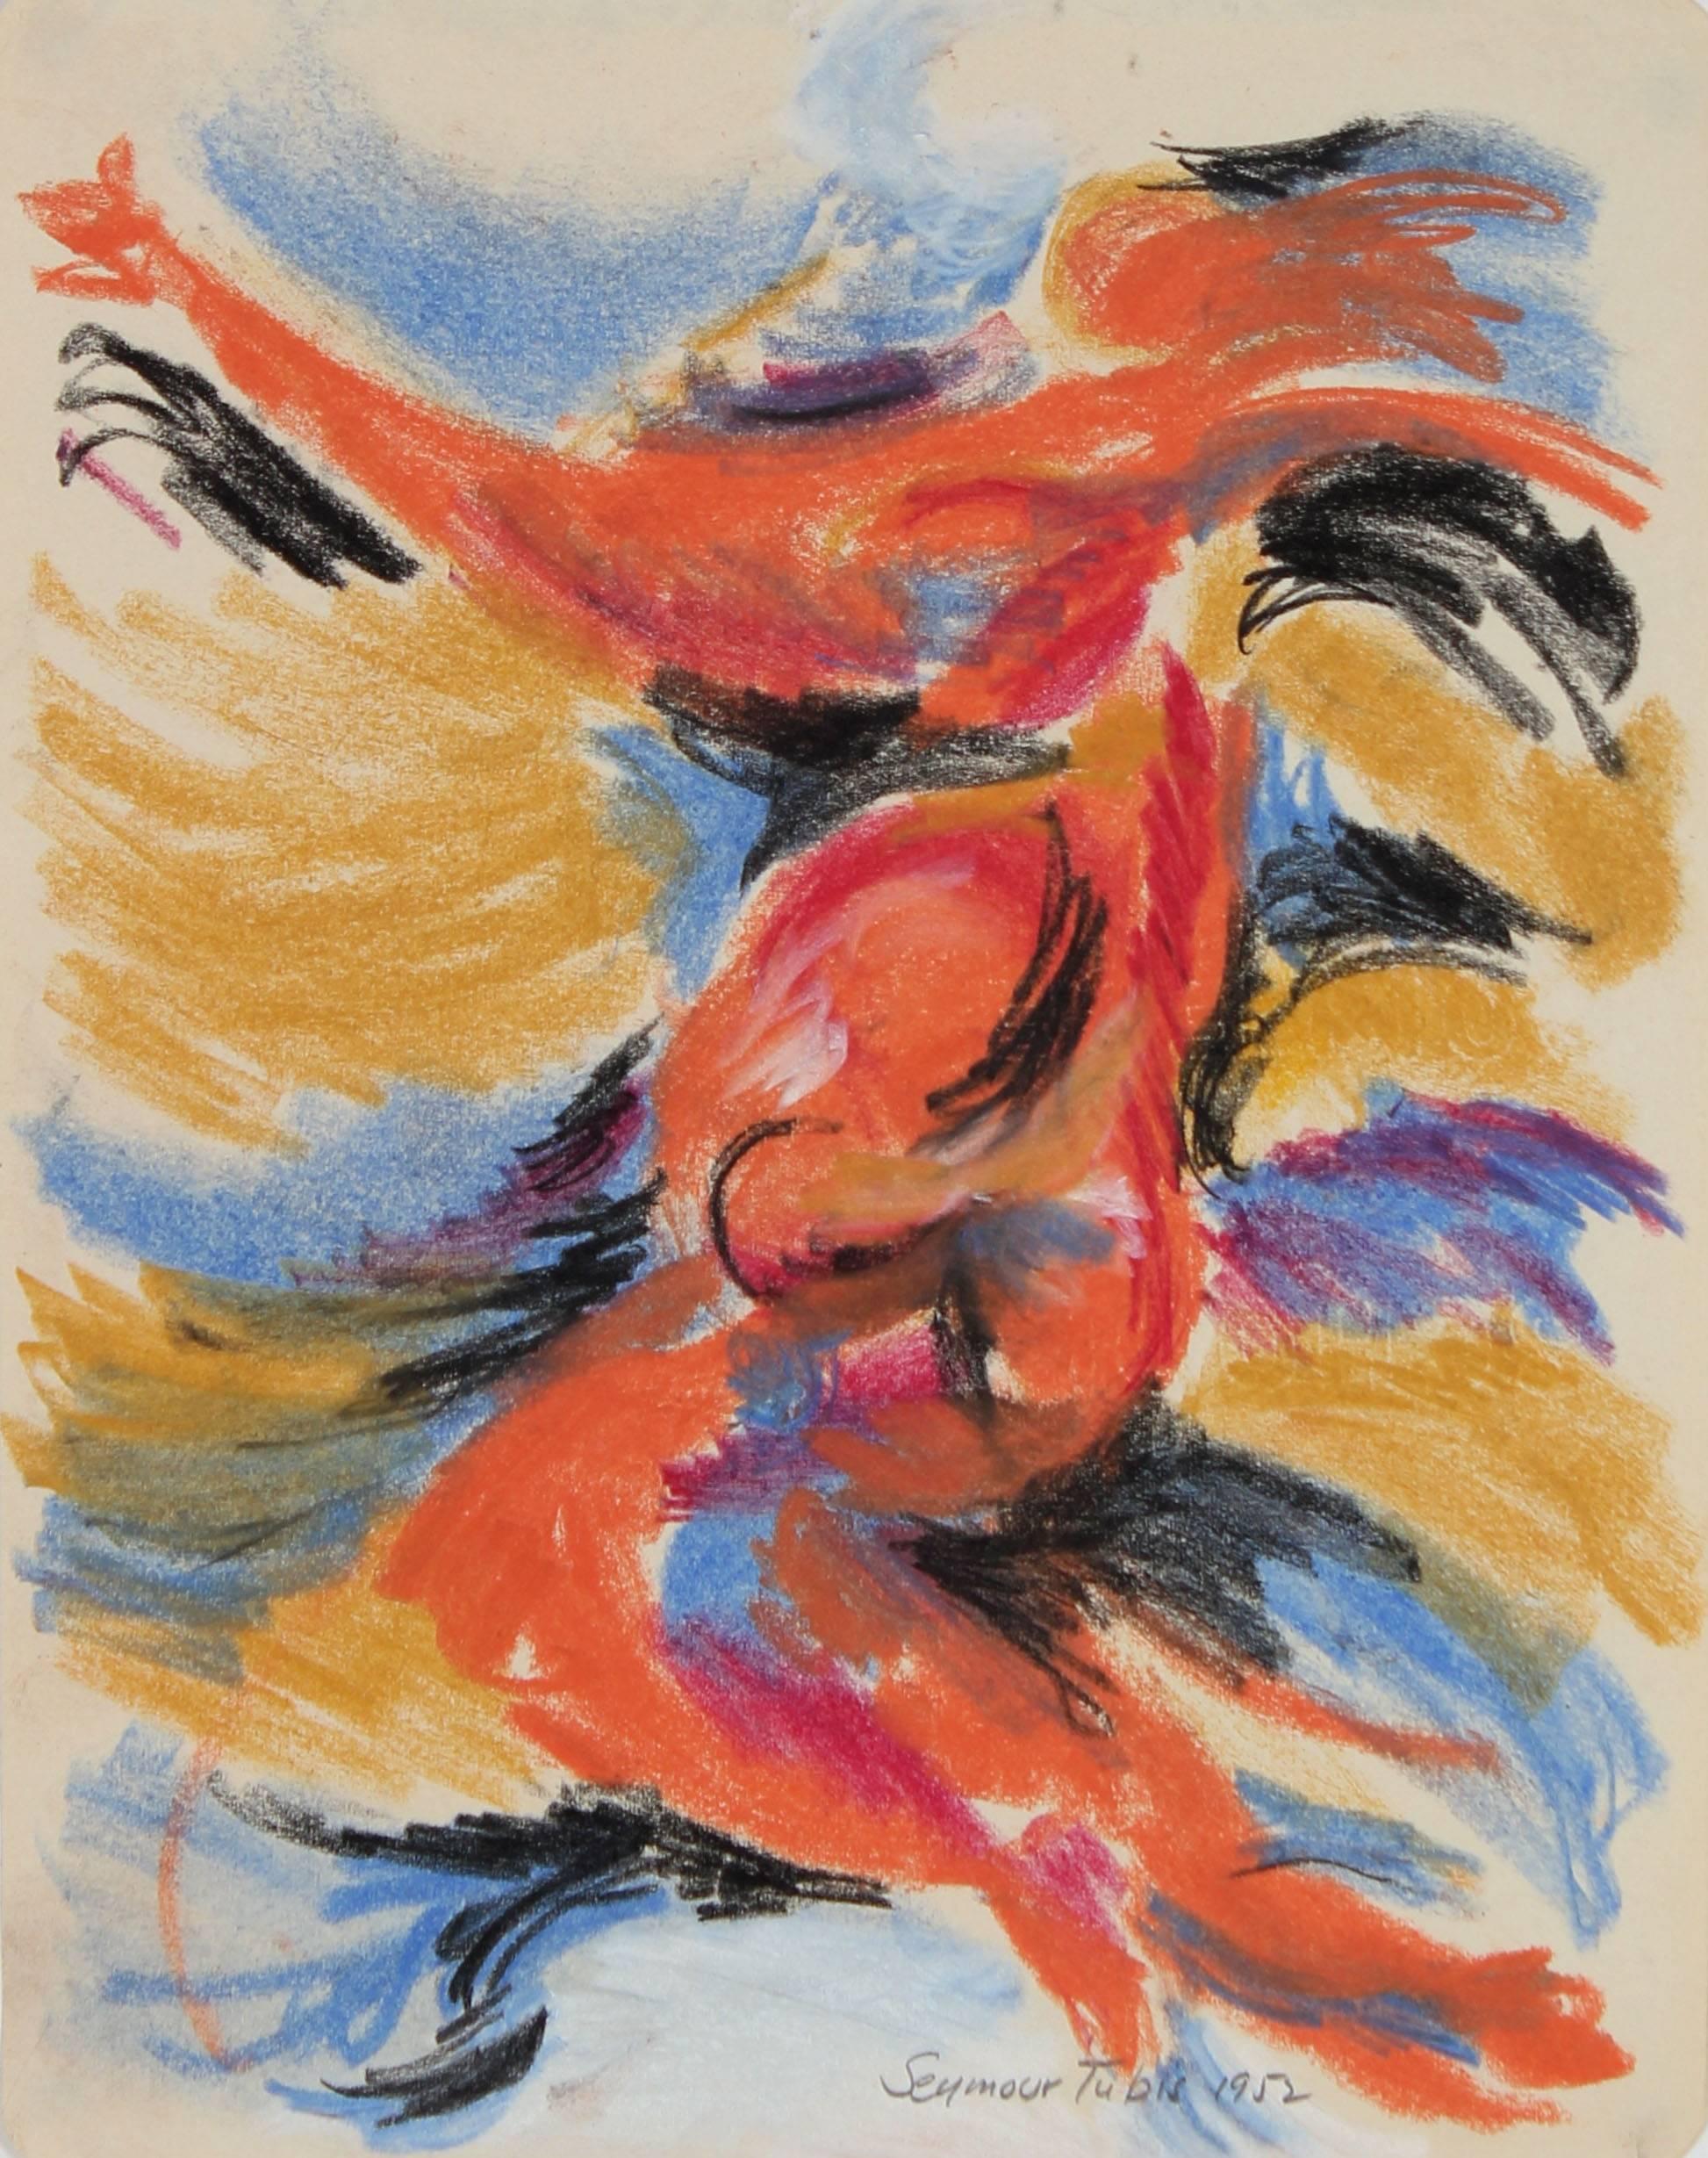 Seymour Tubis Nude - "Dancing Woman" Expressive Abstract Figure